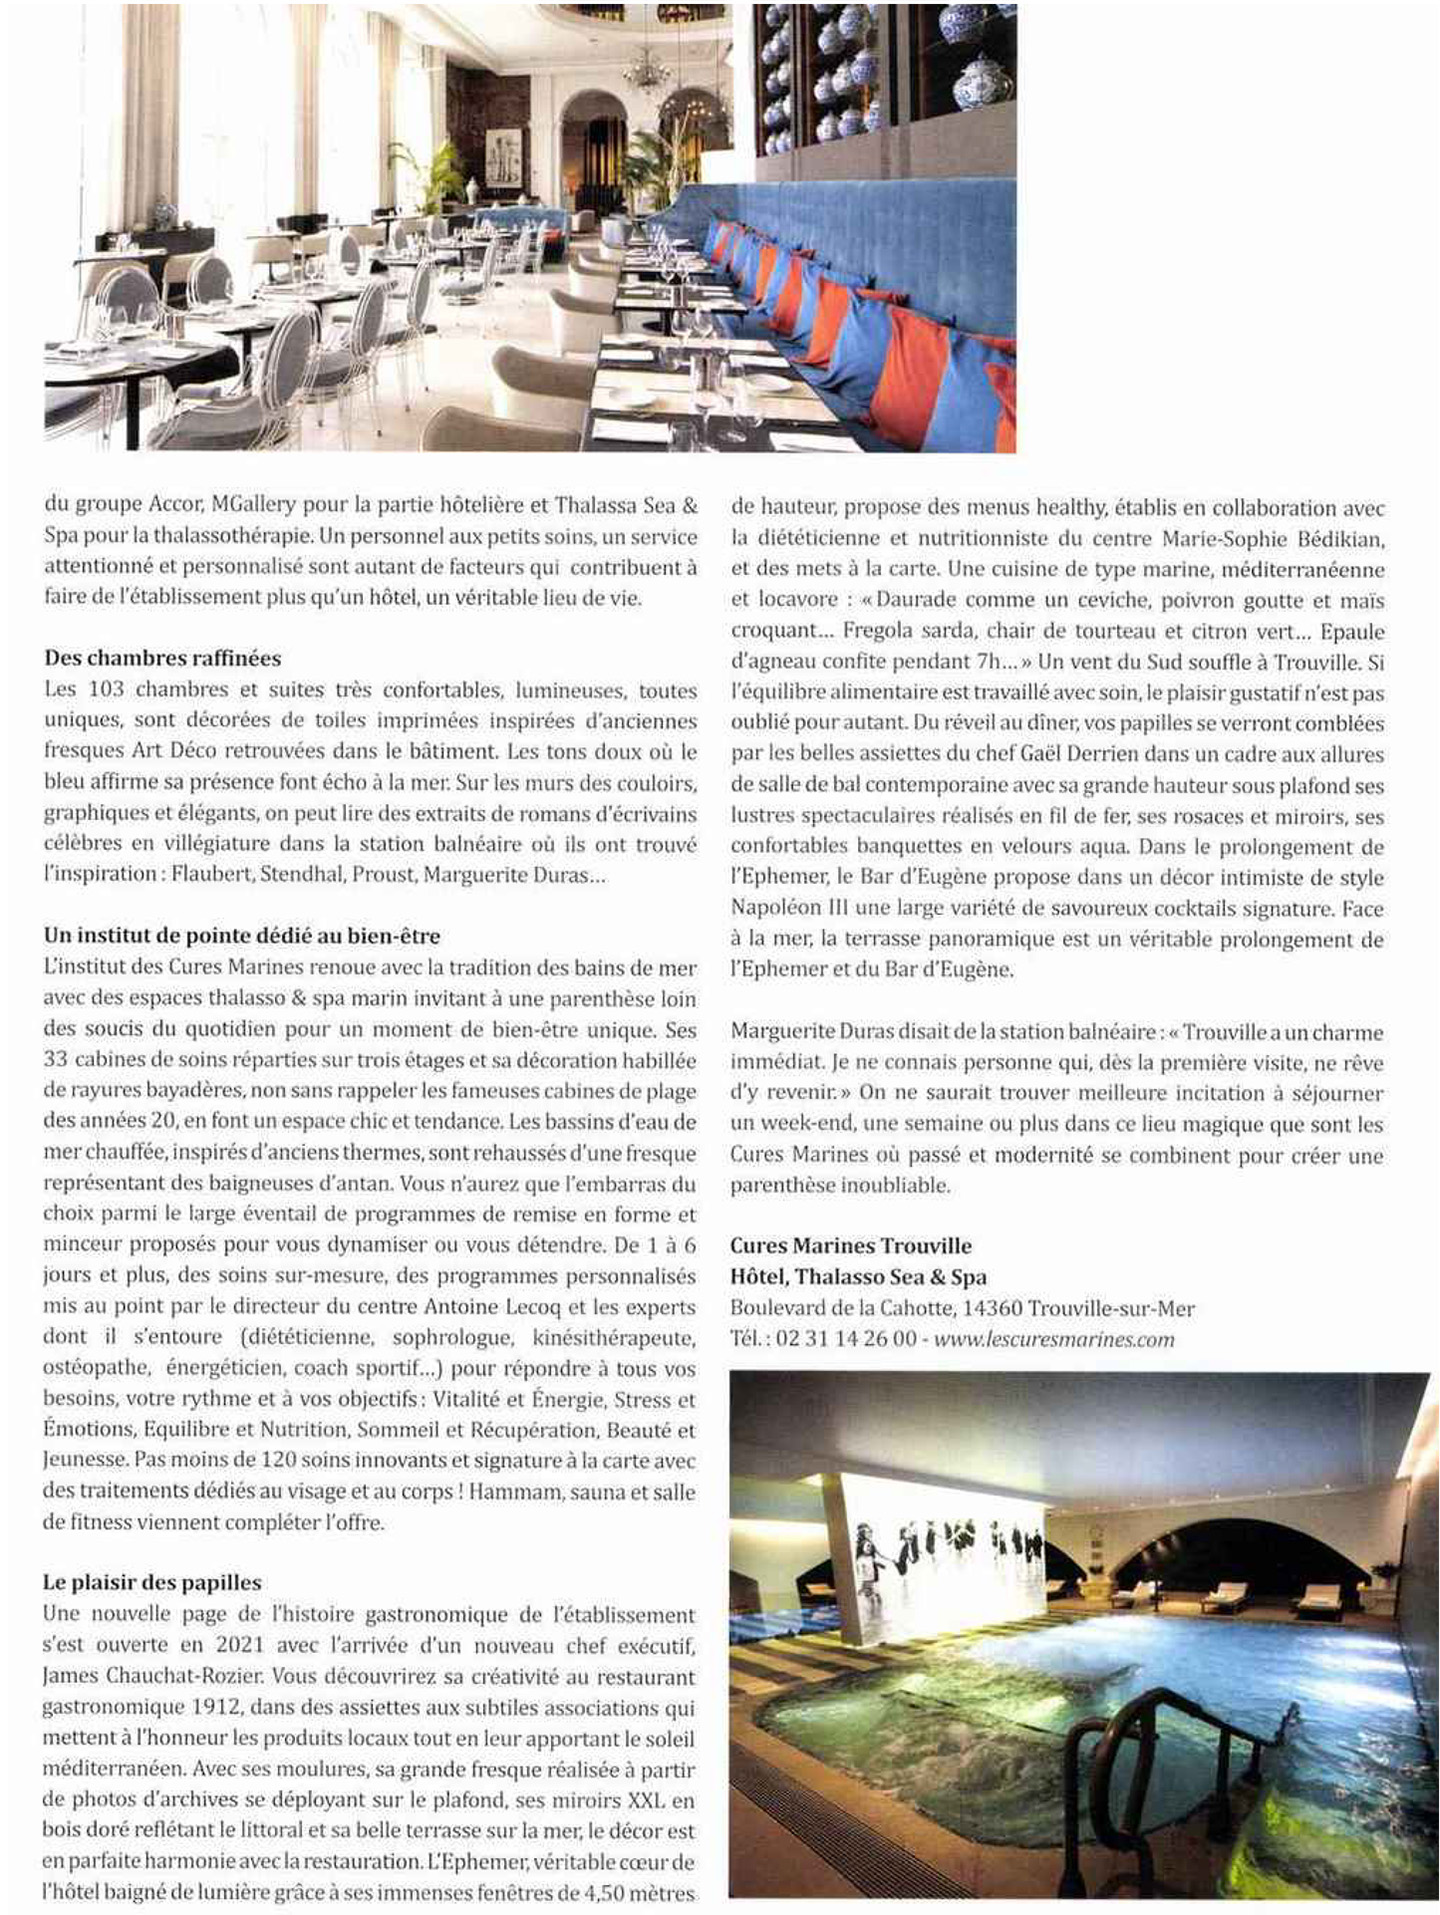 Article on the hotel des Cures Marines de Trouville realized by the studio jean-Philippe Nuel in the magazine Masterchef, new hotel, luxury interior design, thalasso and spa hotel, french luxury hotel